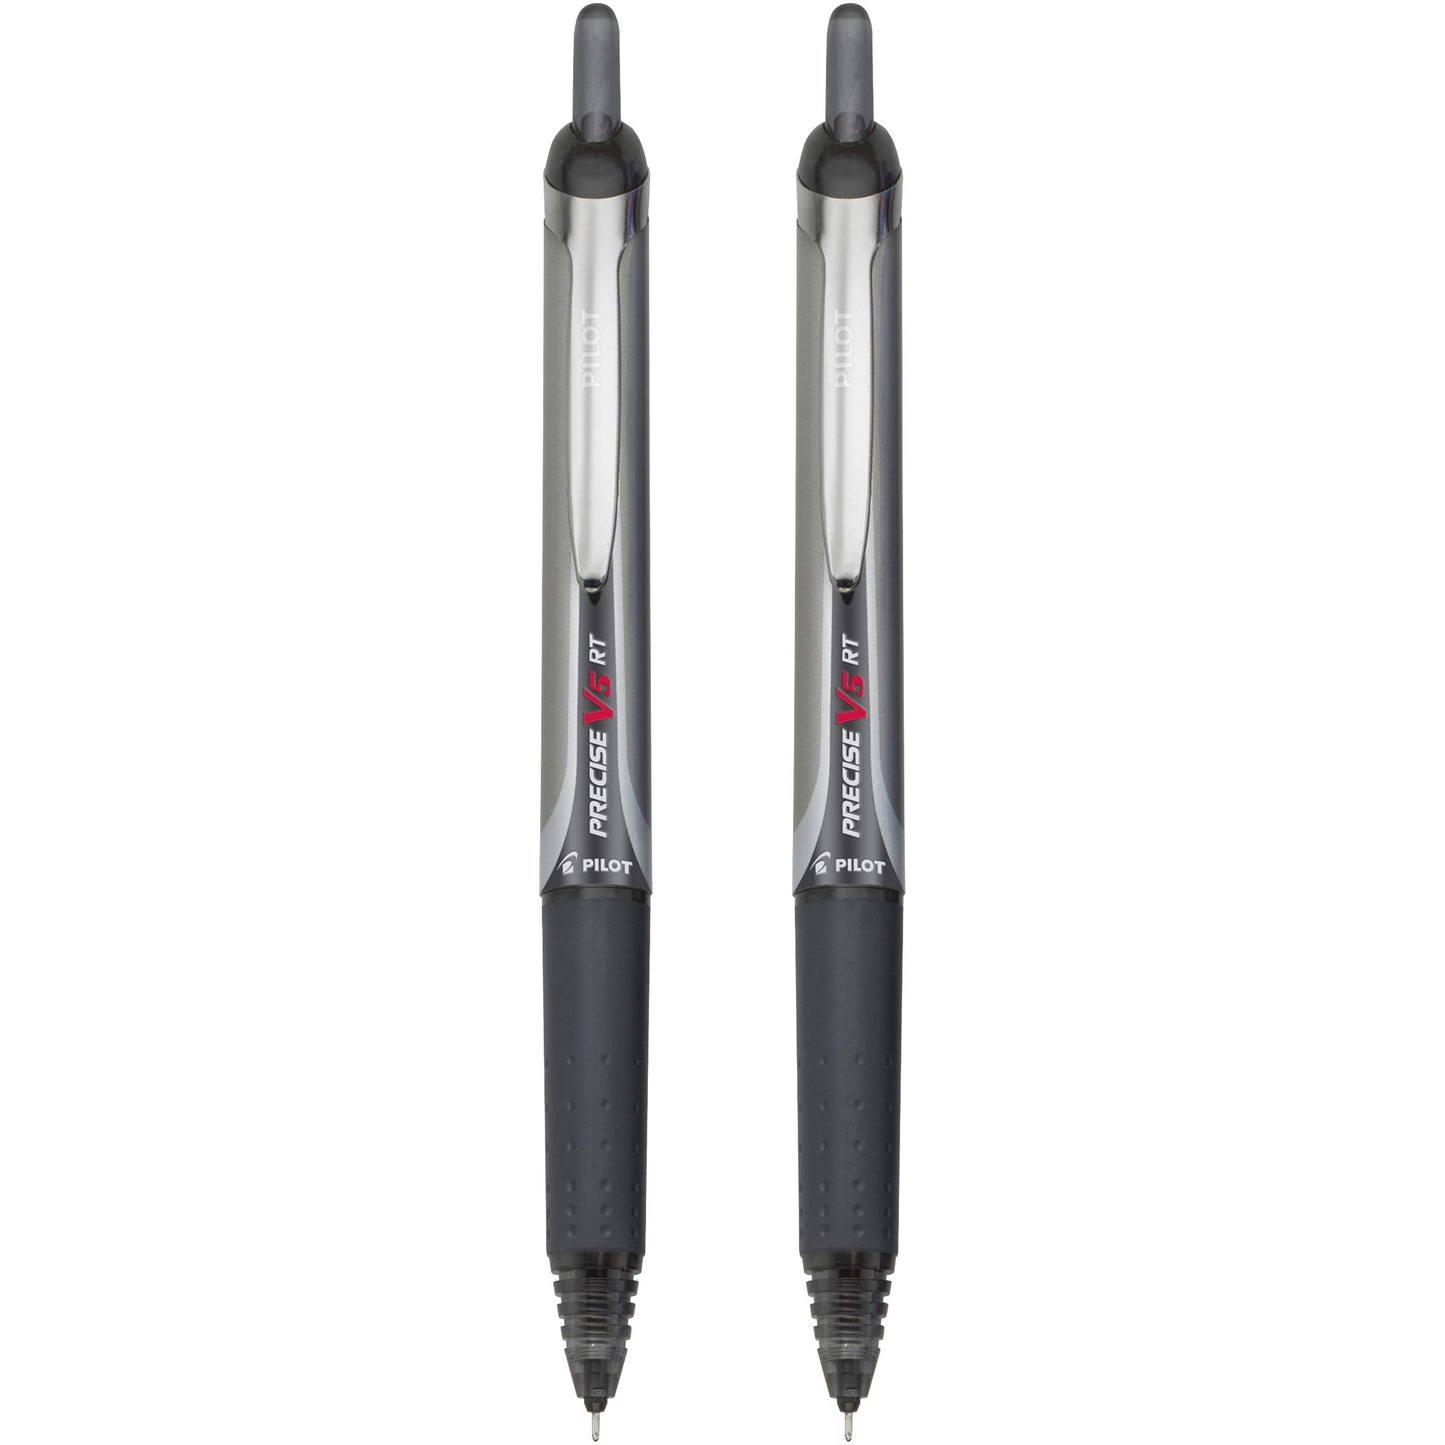 PILOT Precise V5 RT Refillable & Retractable Liquid Ink Rolling Ball Pens, Extra Fine Point (0.5mm) Black Ink, 2-Pack (26050)